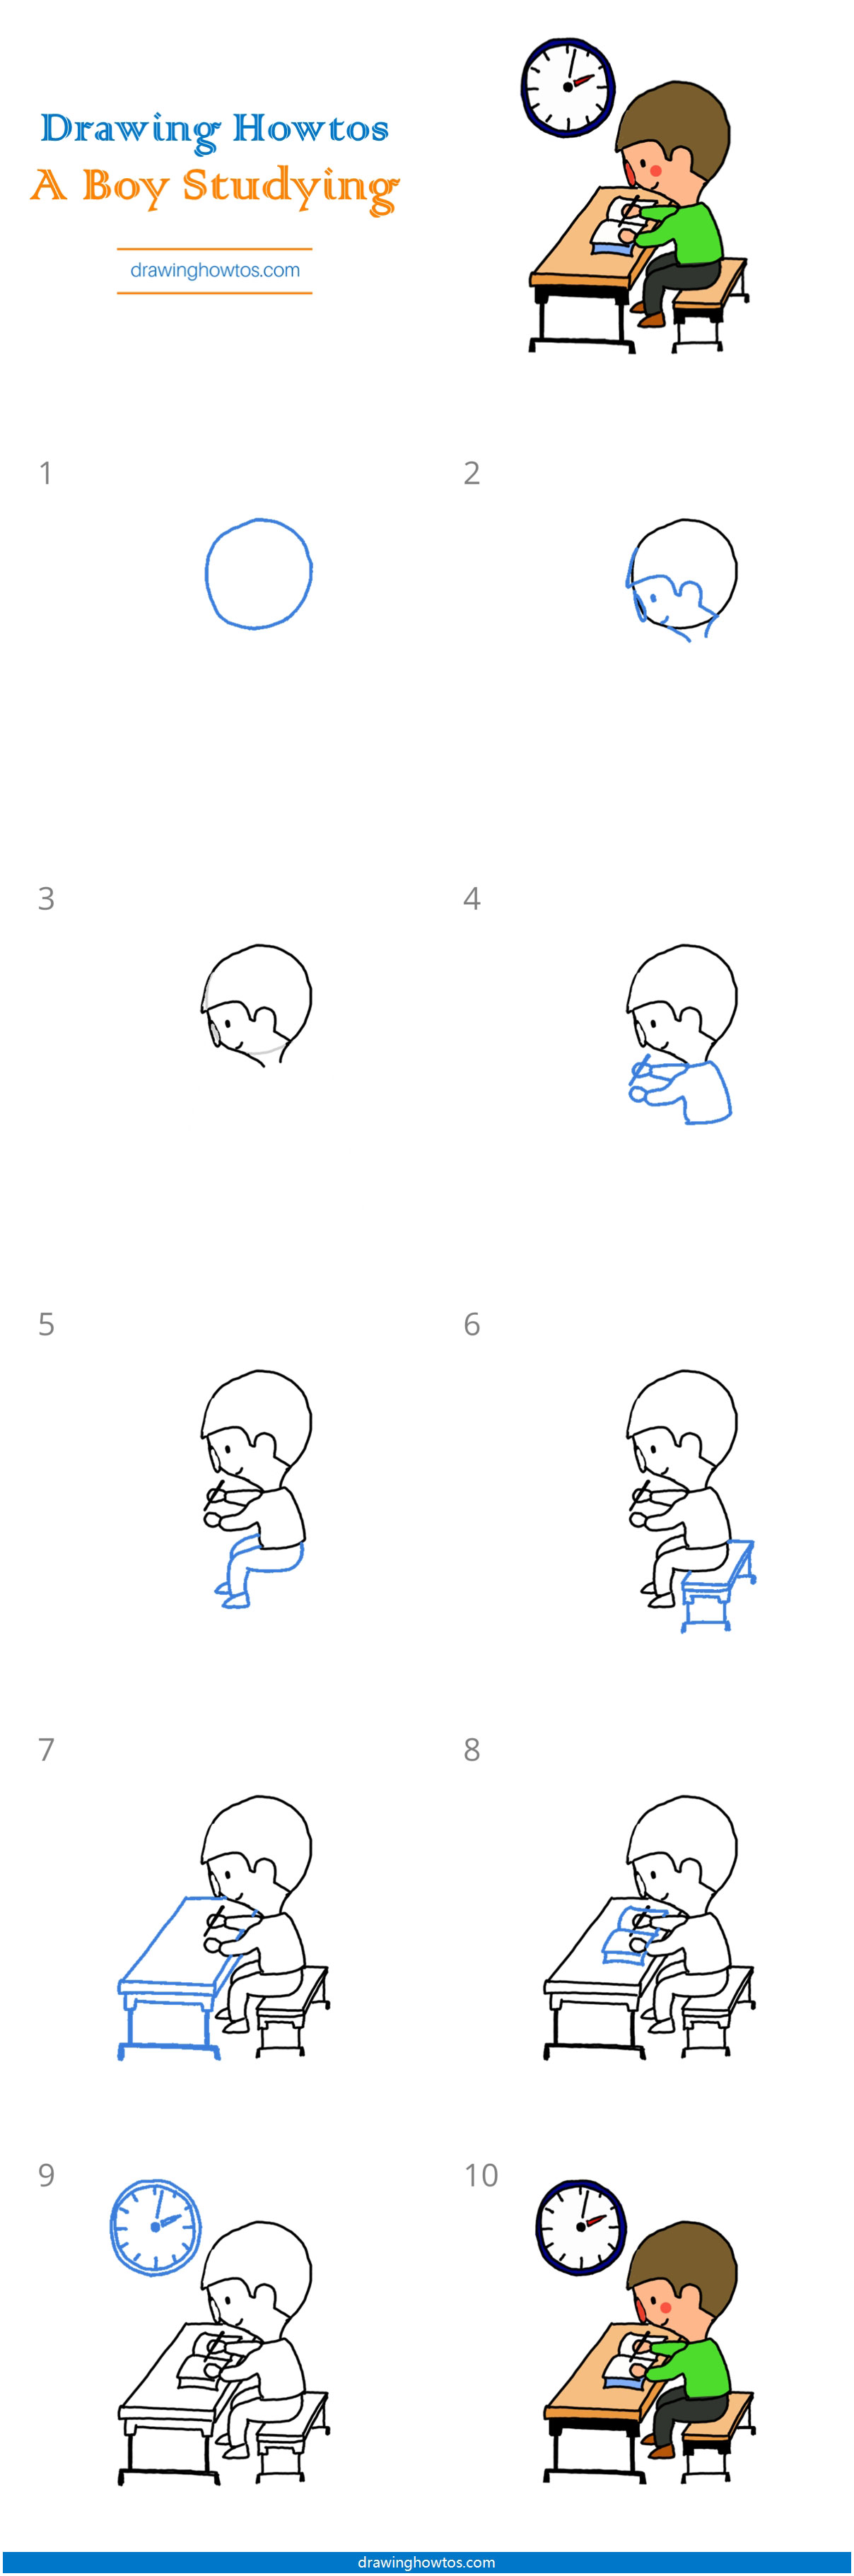 How to draw cute anime boy, Easy anime drawing, Easy drawing for beginners,  Pencil drawing easy, anime, pencil, drawing, How to draw cute anime boy,  anime drawing for boy - thirstymag.com